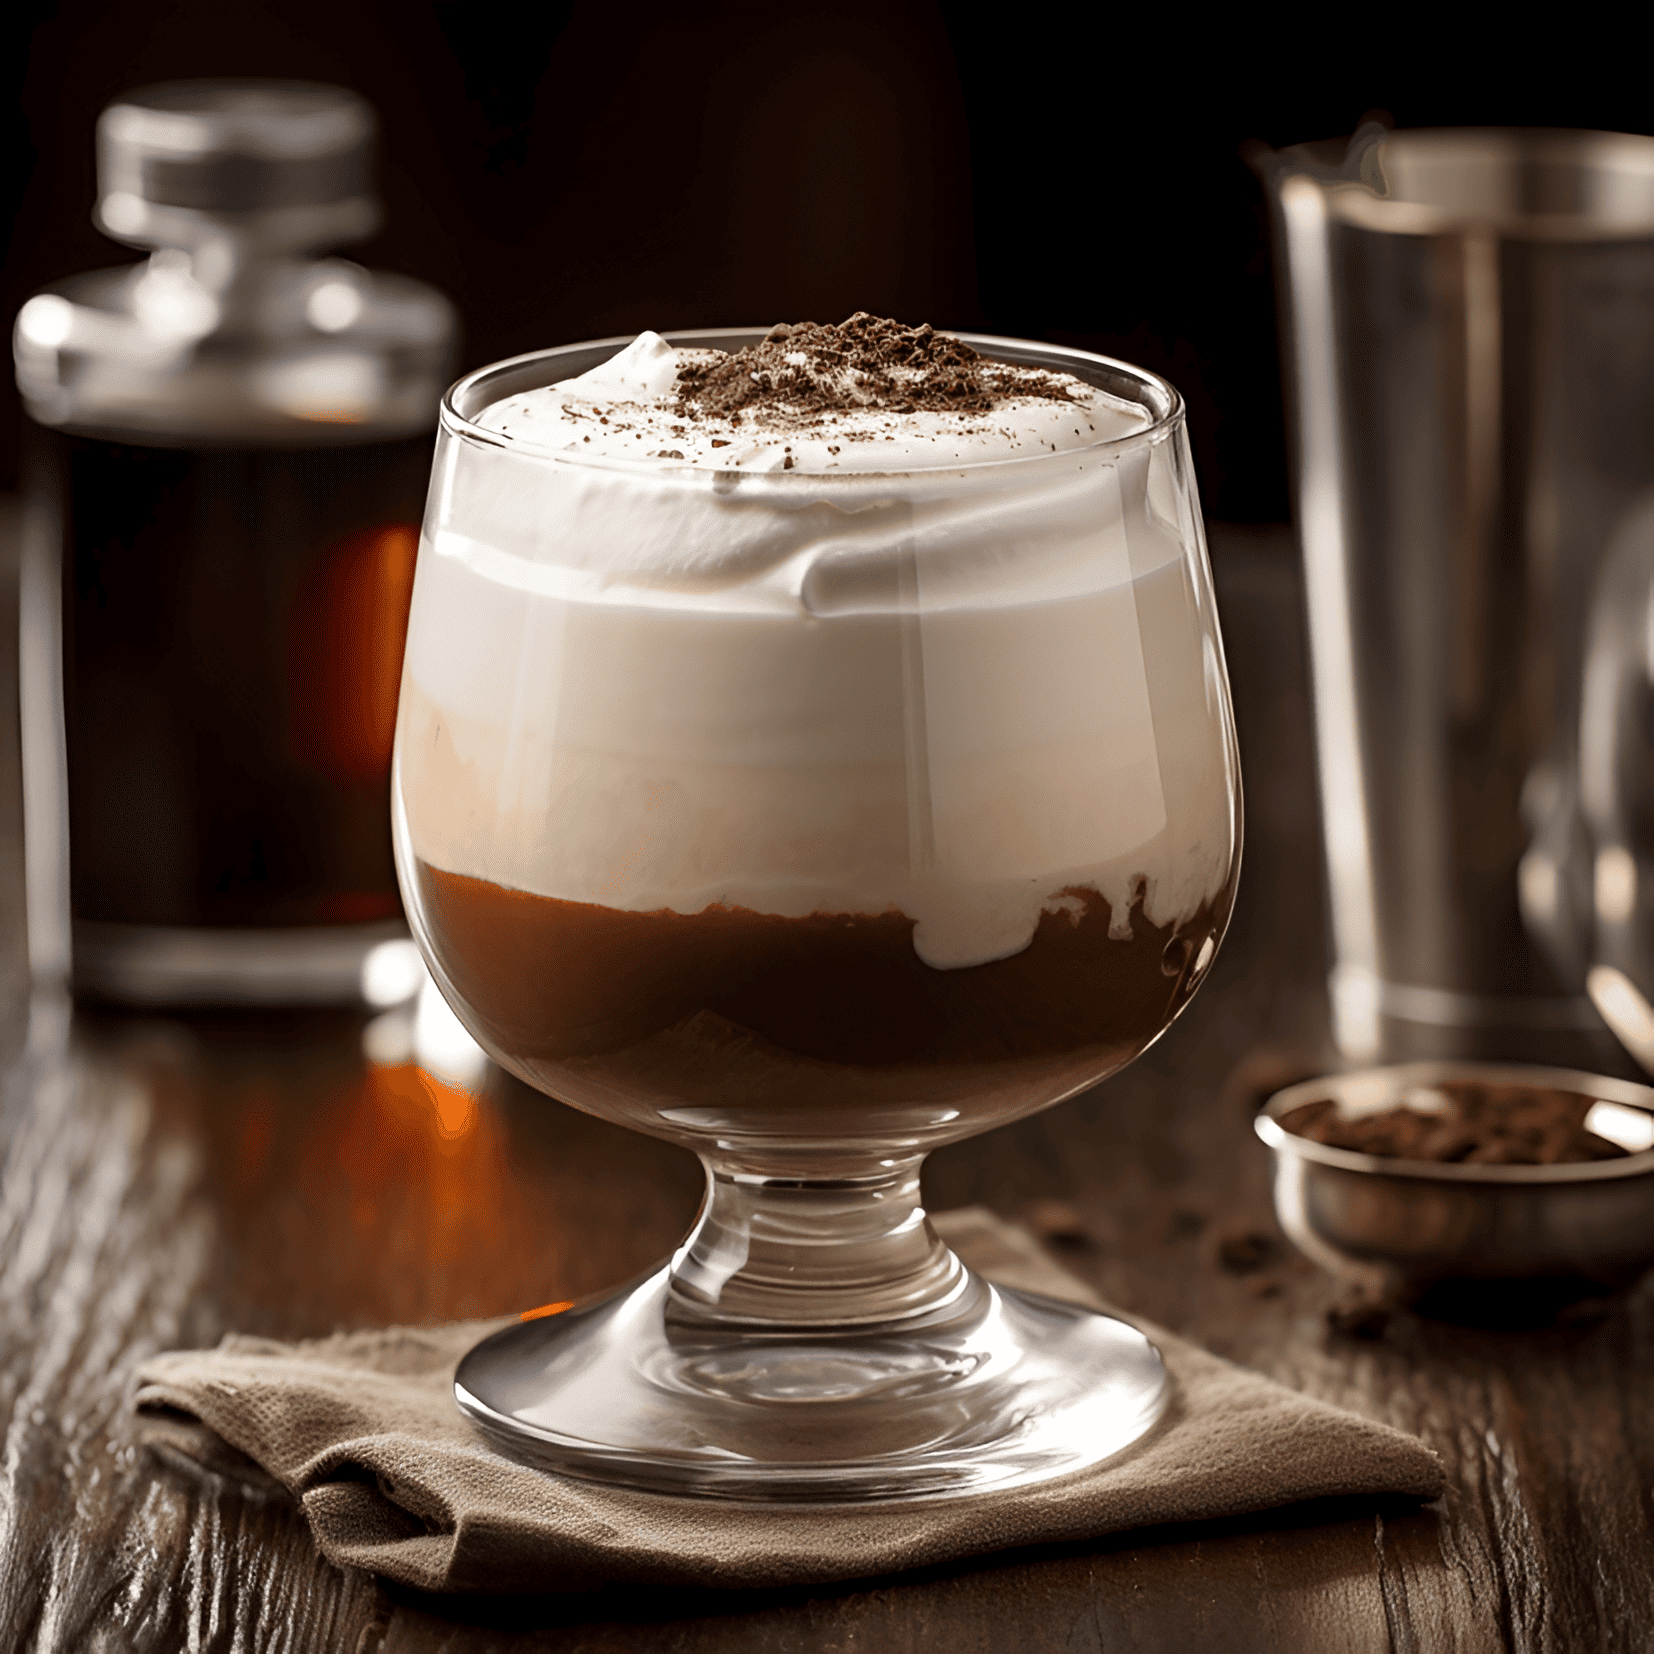 Irish Cream Cocktail Recipe - The Irish Cream cocktail is rich, creamy, and sweet with a hint of chocolate and a warming whiskey finish. It is smooth and velvety on the palate, making it a perfect after-dinner treat.